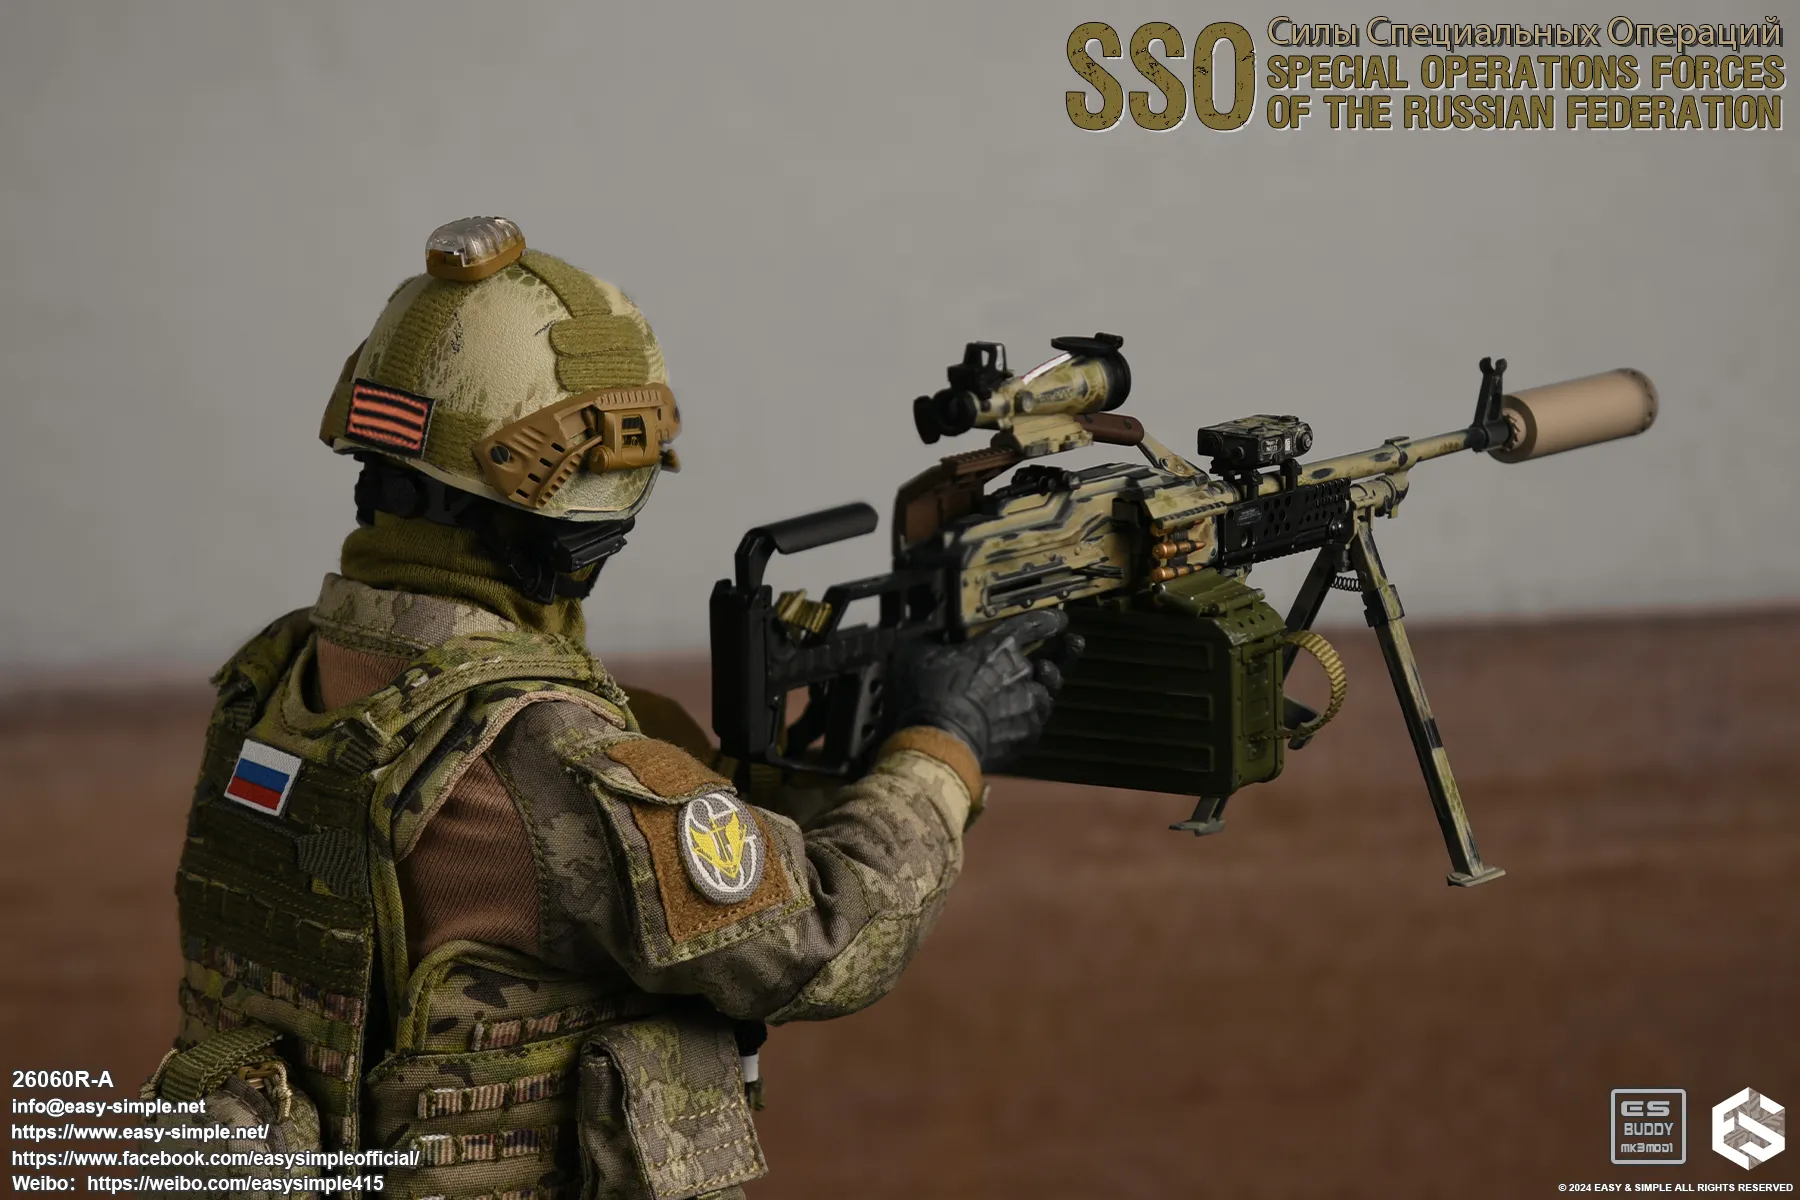 easy - NEW PRODUCT: Easy&Simple 26060R-A Russian Special Operations Forces (SSO) Format,webp